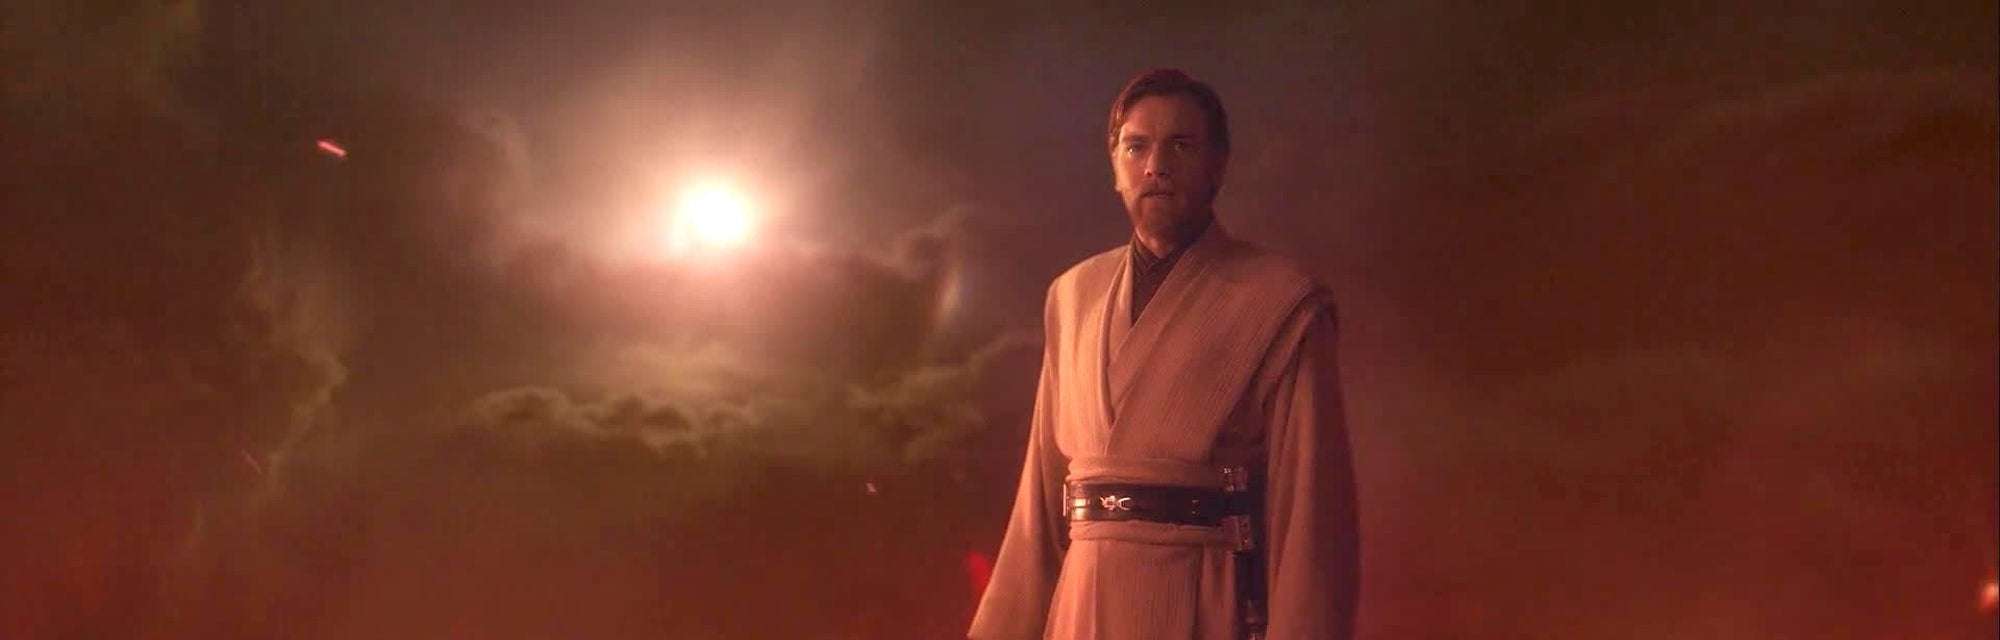 image for Ewan McGregor Confirms Kenobi Disney Plus Series Will Use Same Visual Effects Technology Featured in ‘The Mandalorian’